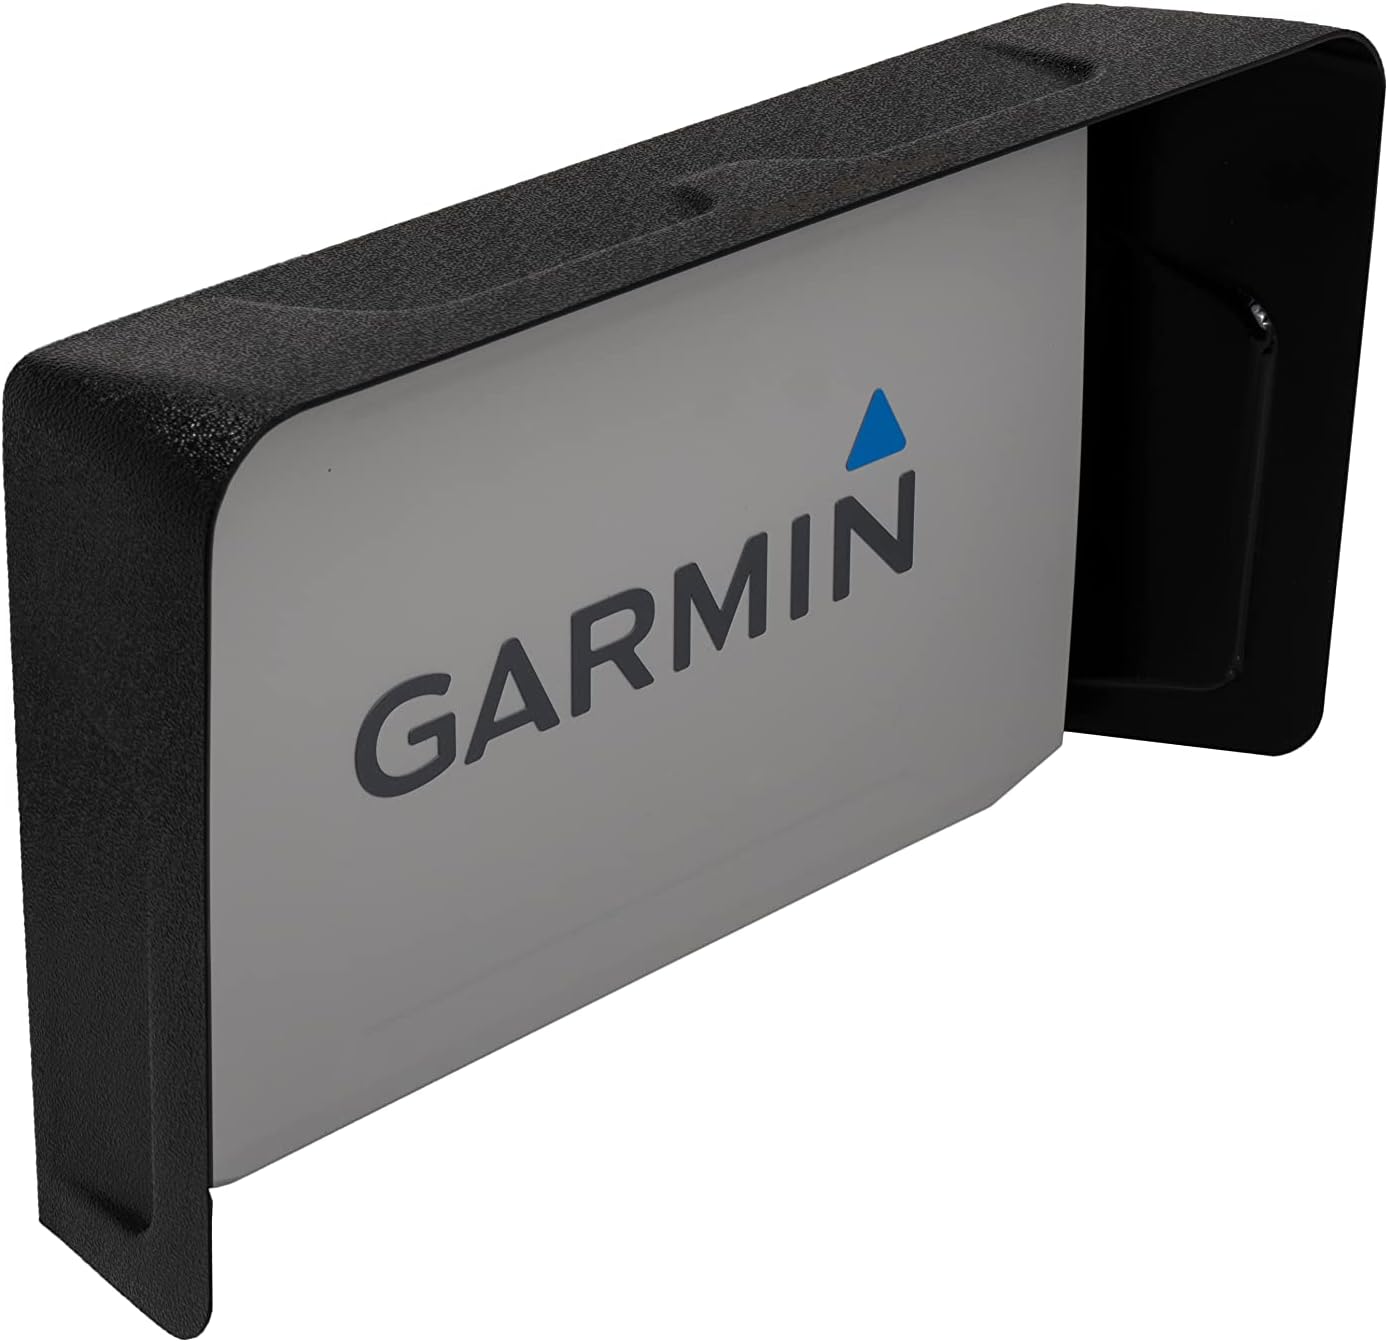 BerleyPro Visor Compatible with Garmin GPS, Fish Finders and Depth Finders. Designed as an anti-glare sun shande and screen protector for the Garmin Striker, Garmin Echomap, Garmin Echomap Ultra, Garmin Echomap UHD, Garmin GPSMAP, Garmin Echomap UHD2 , and more.